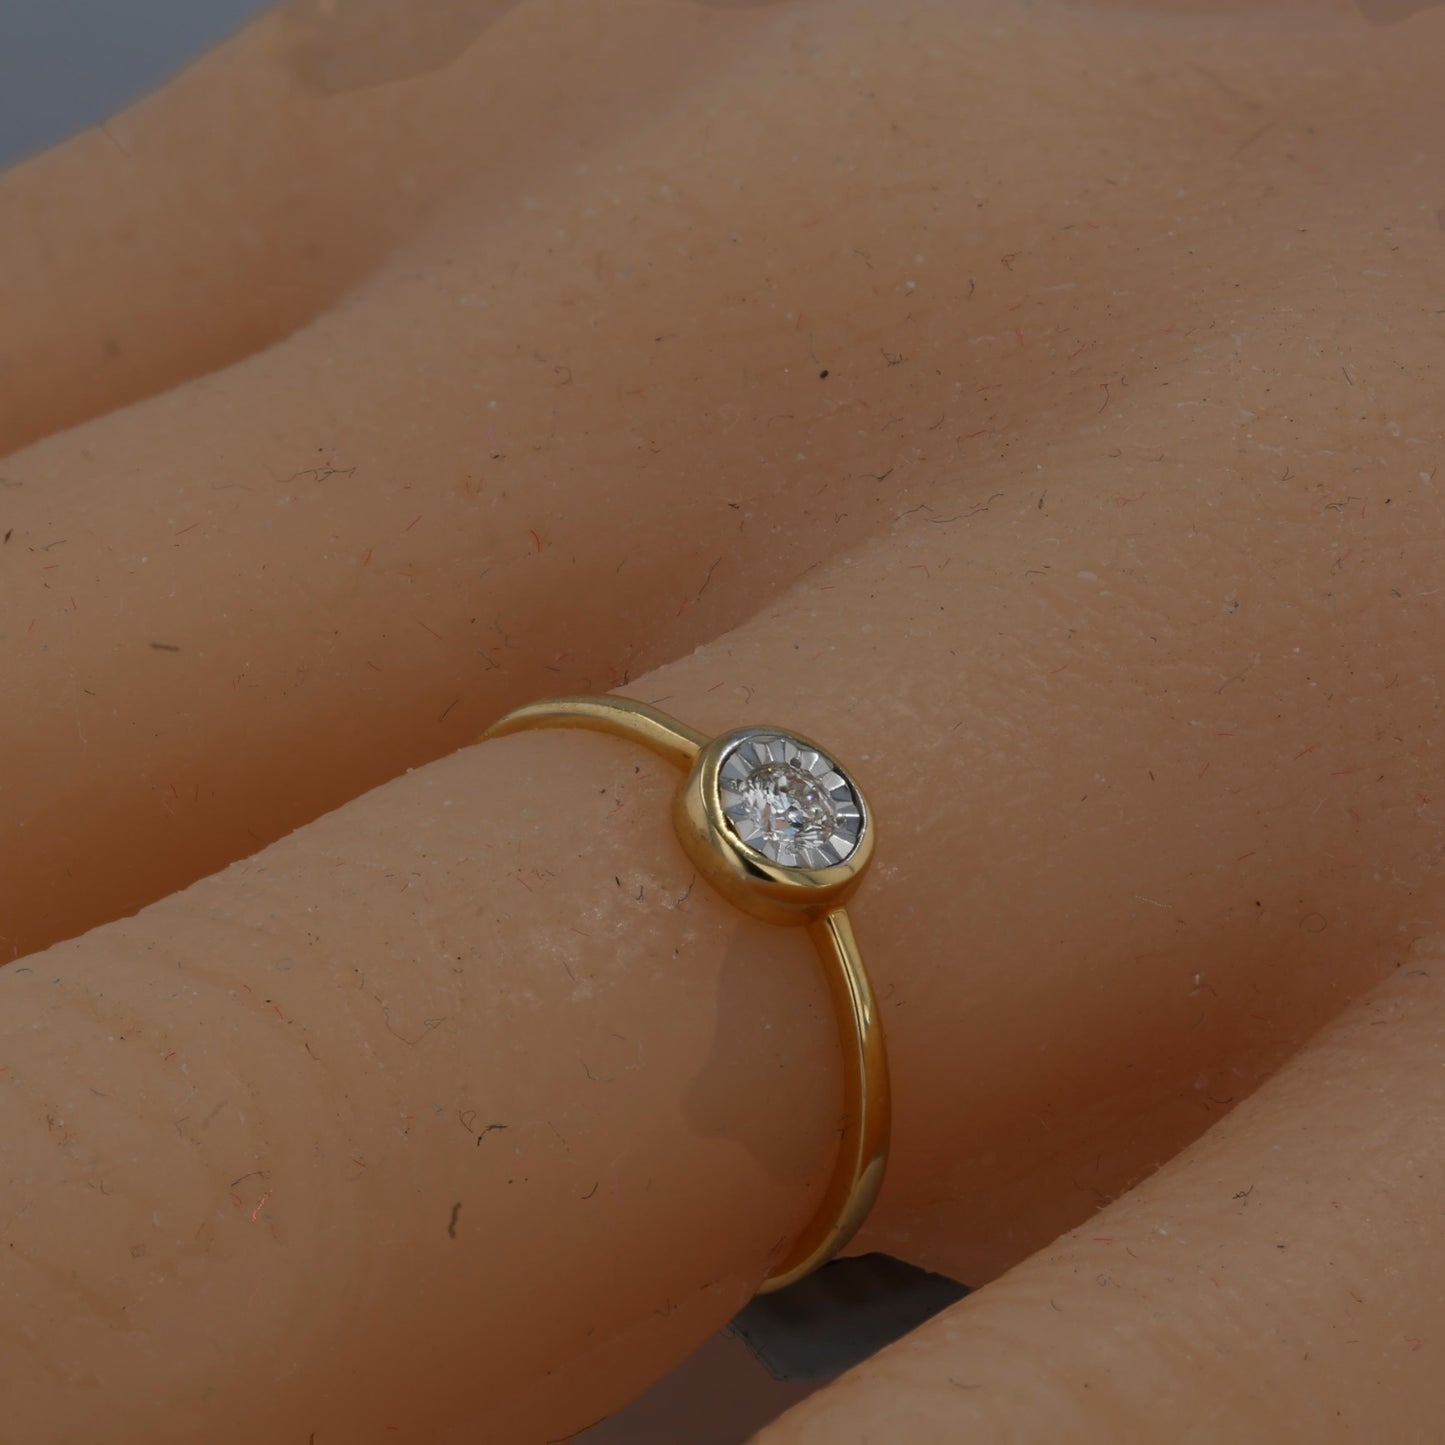 14K Yellow gold natural diamonds solitaire ring-RG5775Y